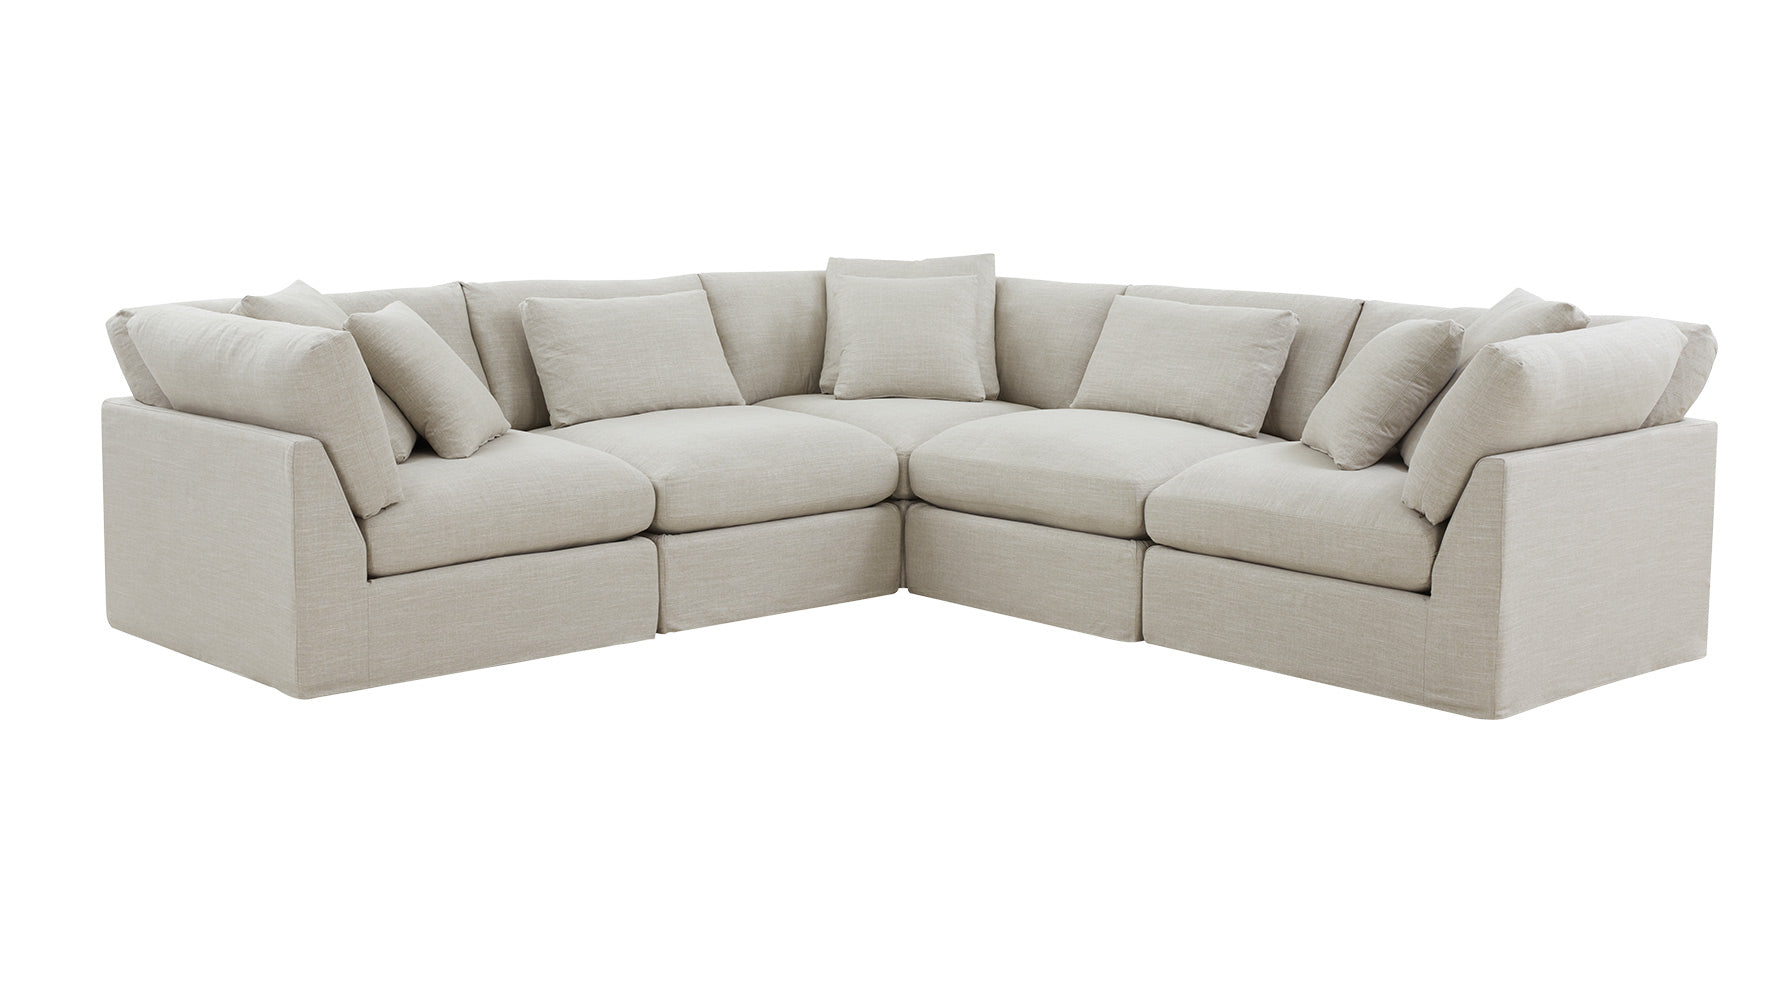 Get Together™ 5-Piece Modular Sectional Closed, Large, Light Pebble - Image 2